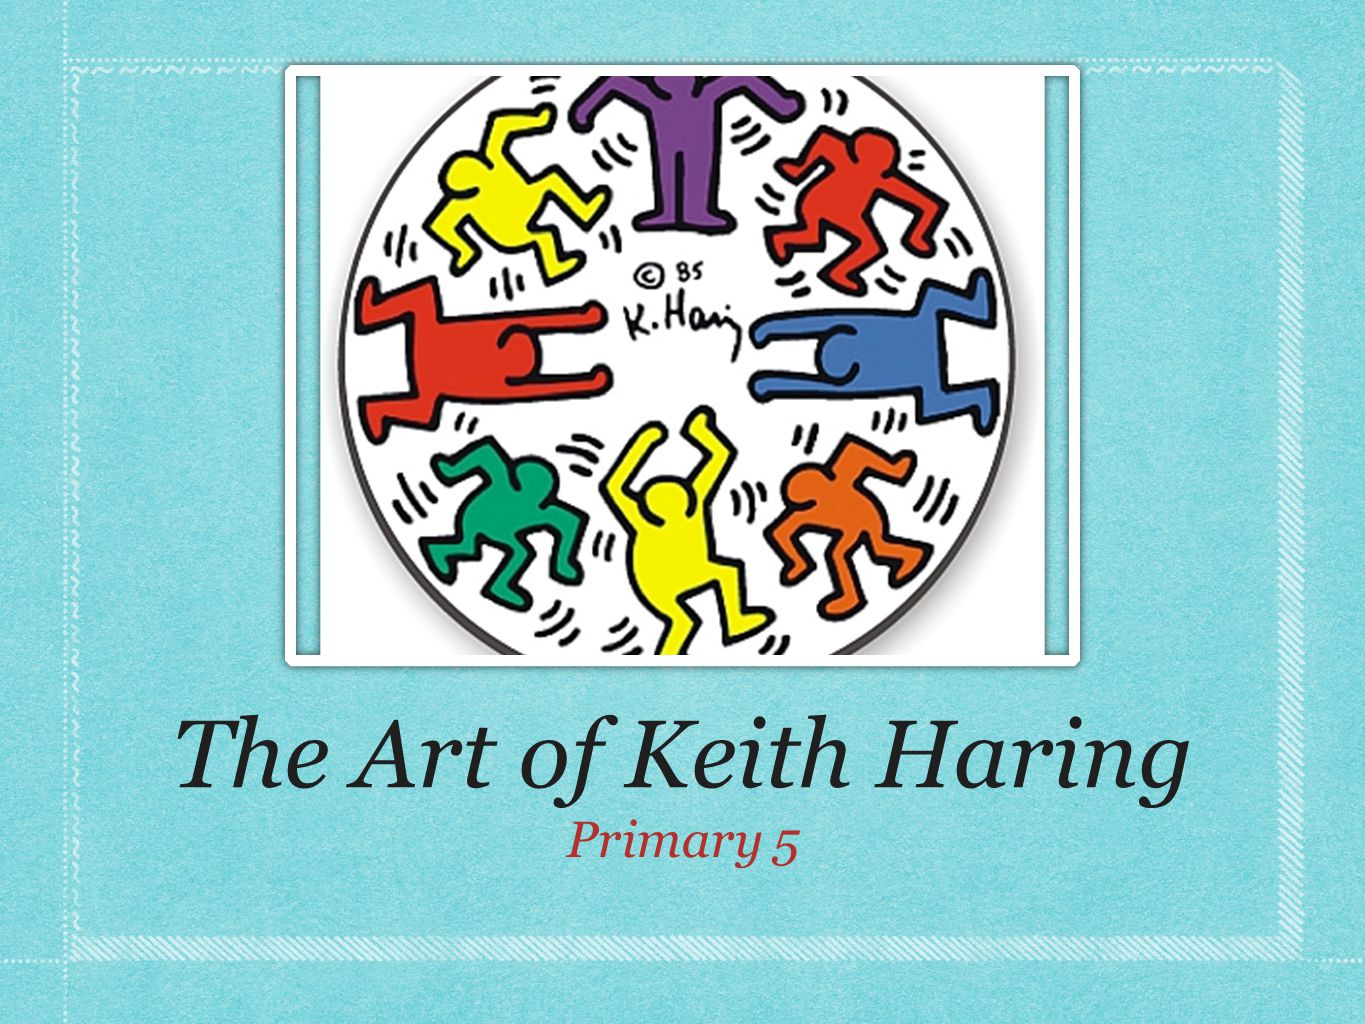 The Art of Keith Haring Primary 5